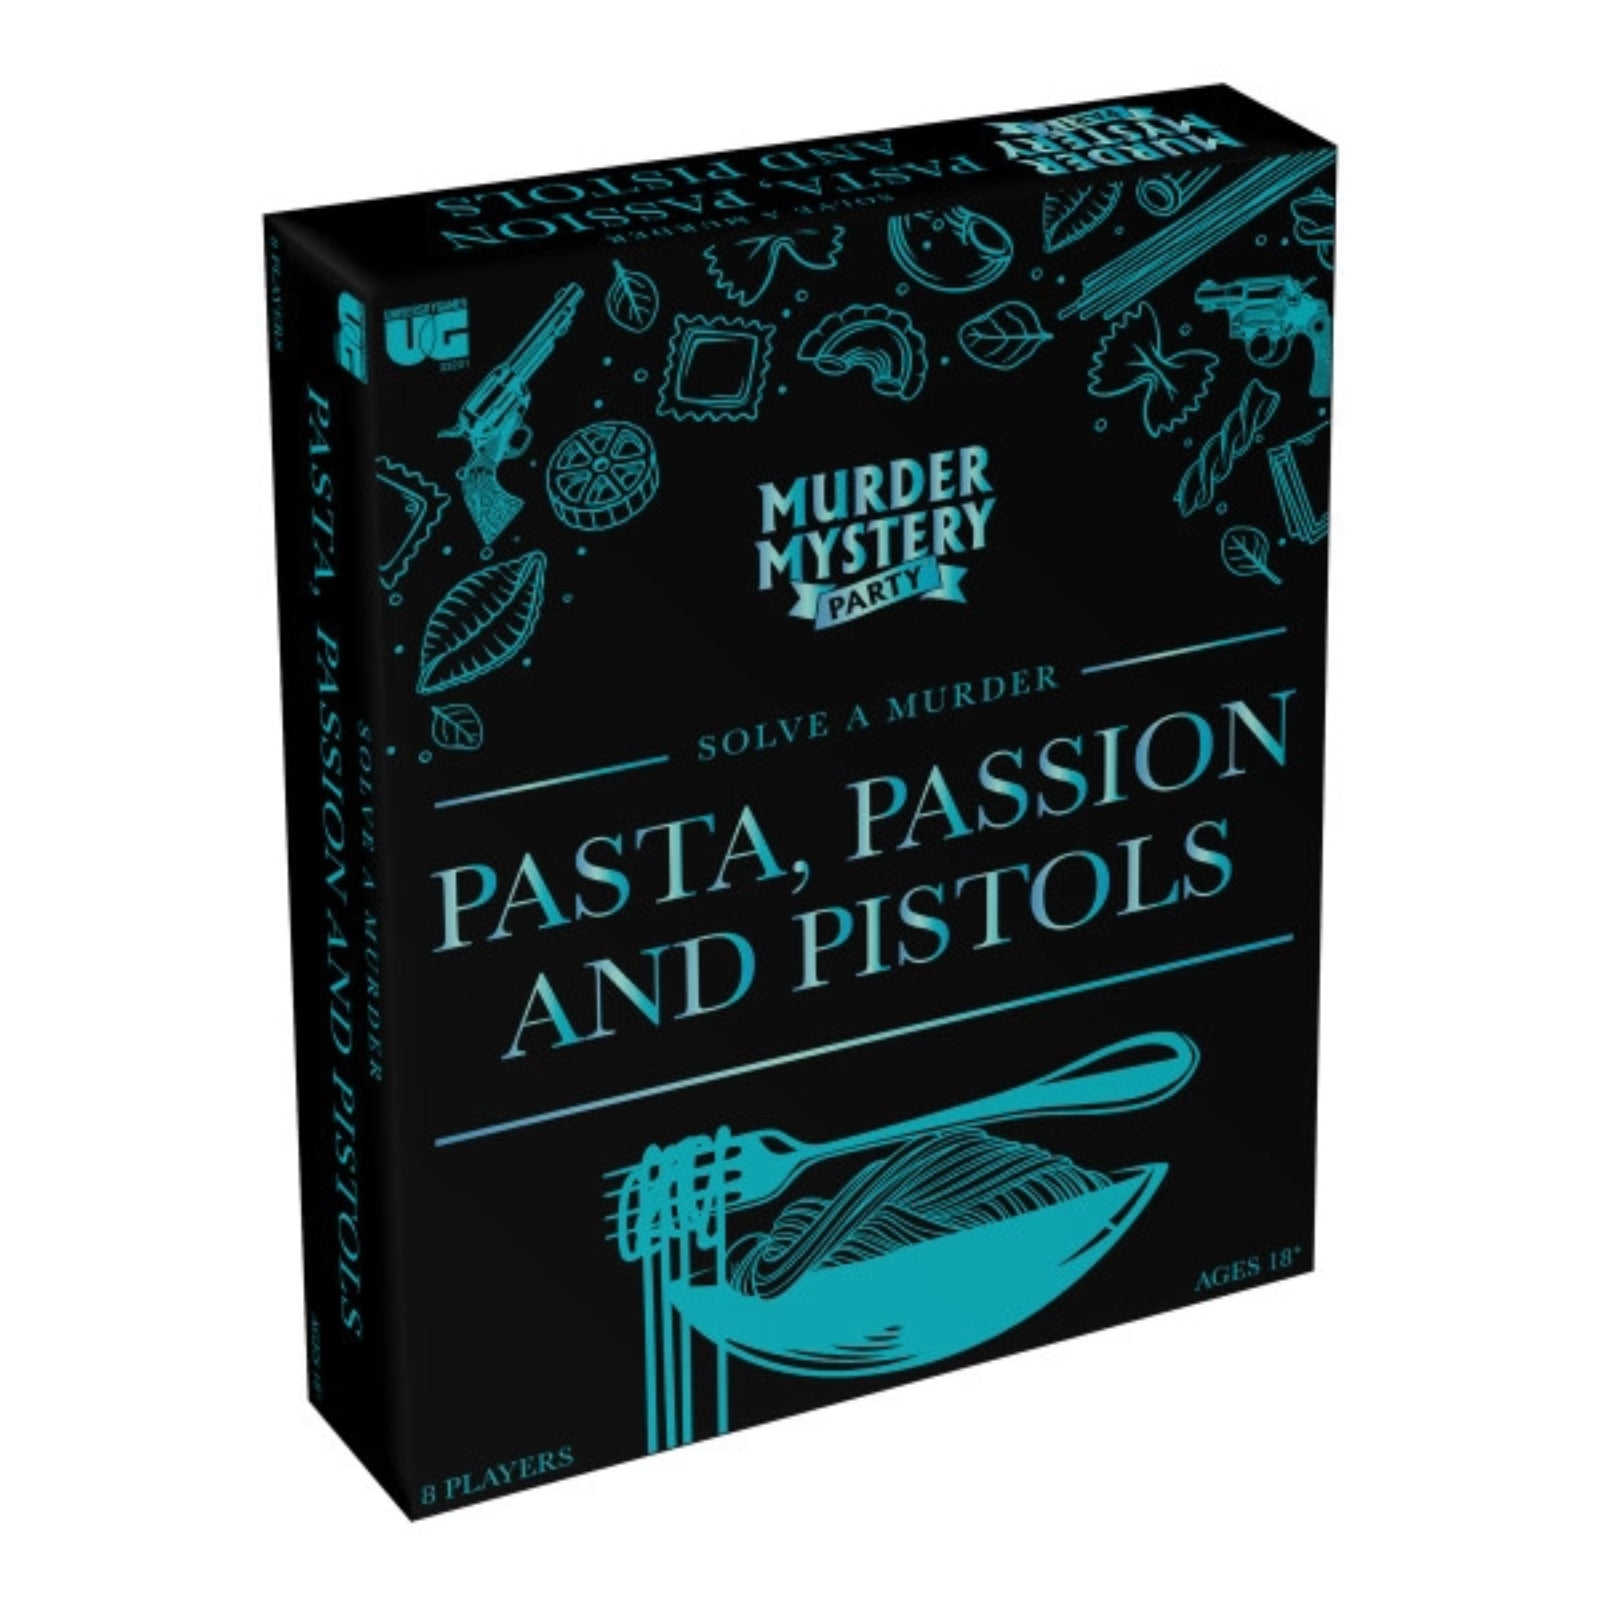 Pasta, Passion and Pistols - Murder Mystery Party